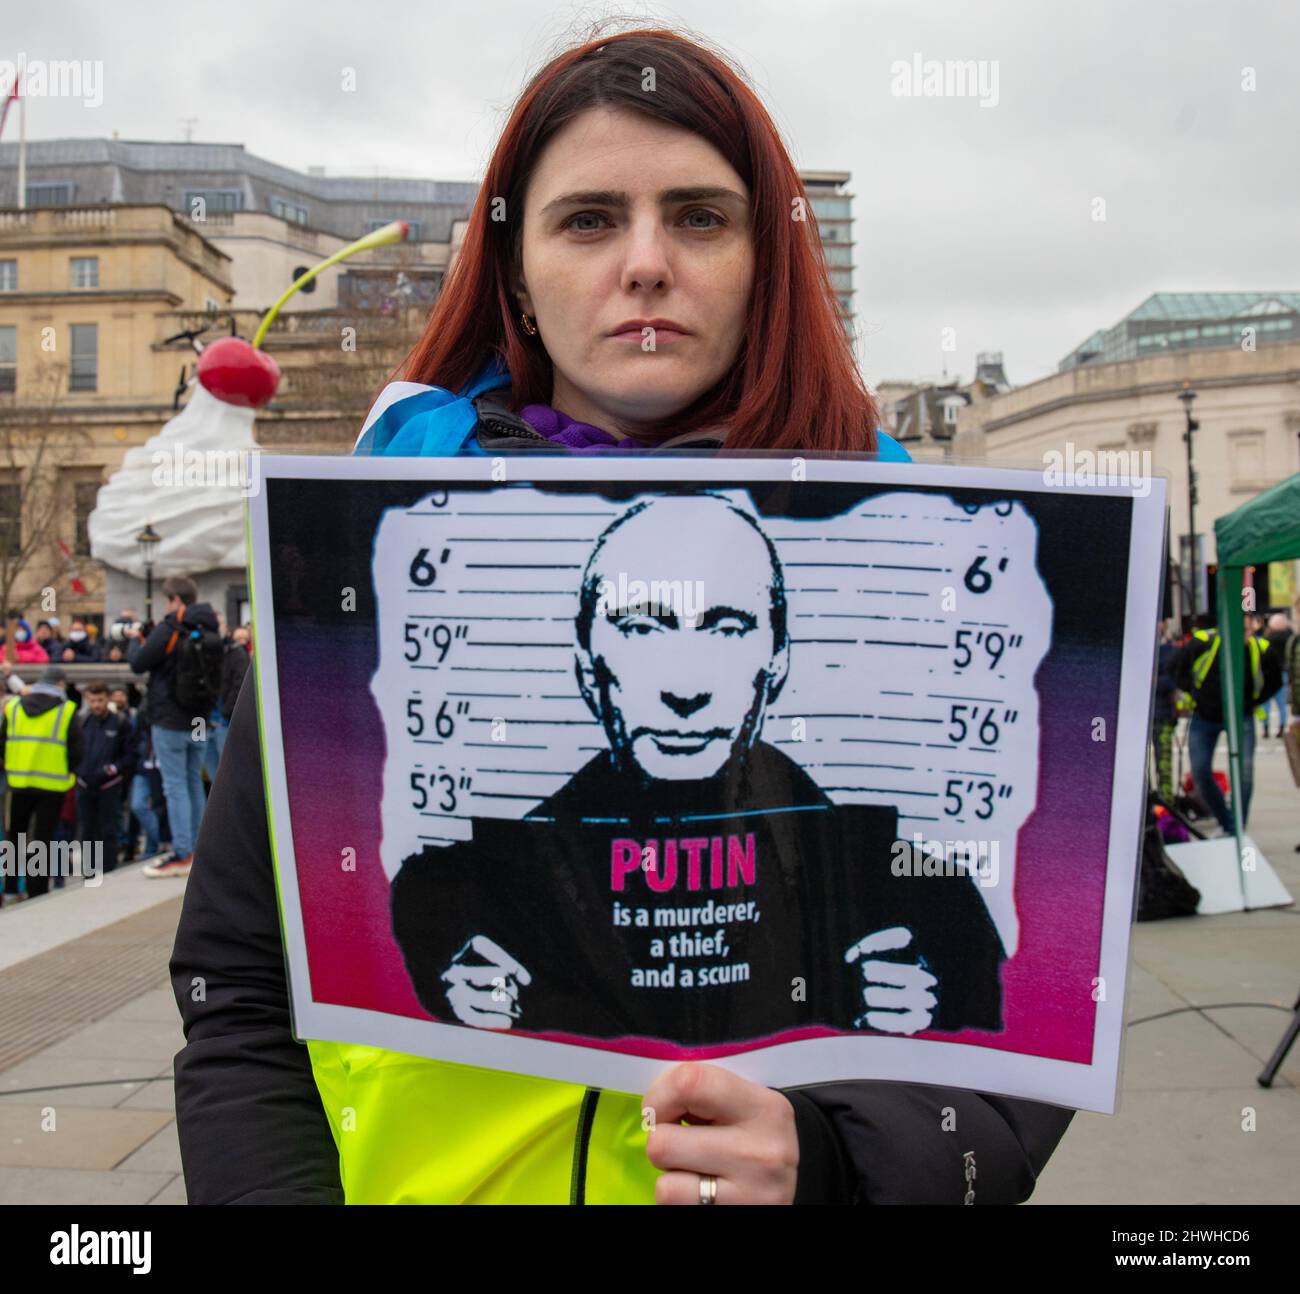 London, England, UK 5 March 2022 Around a thousand protesters gather in Trafalgar Square in solidarity with Ukraine and against Russia’s invasion of the country. Women and children hold banners, posters and placards with messages to Putin and Russia Credit: Denise Laura Baker/Alamy Live News Stock Photo